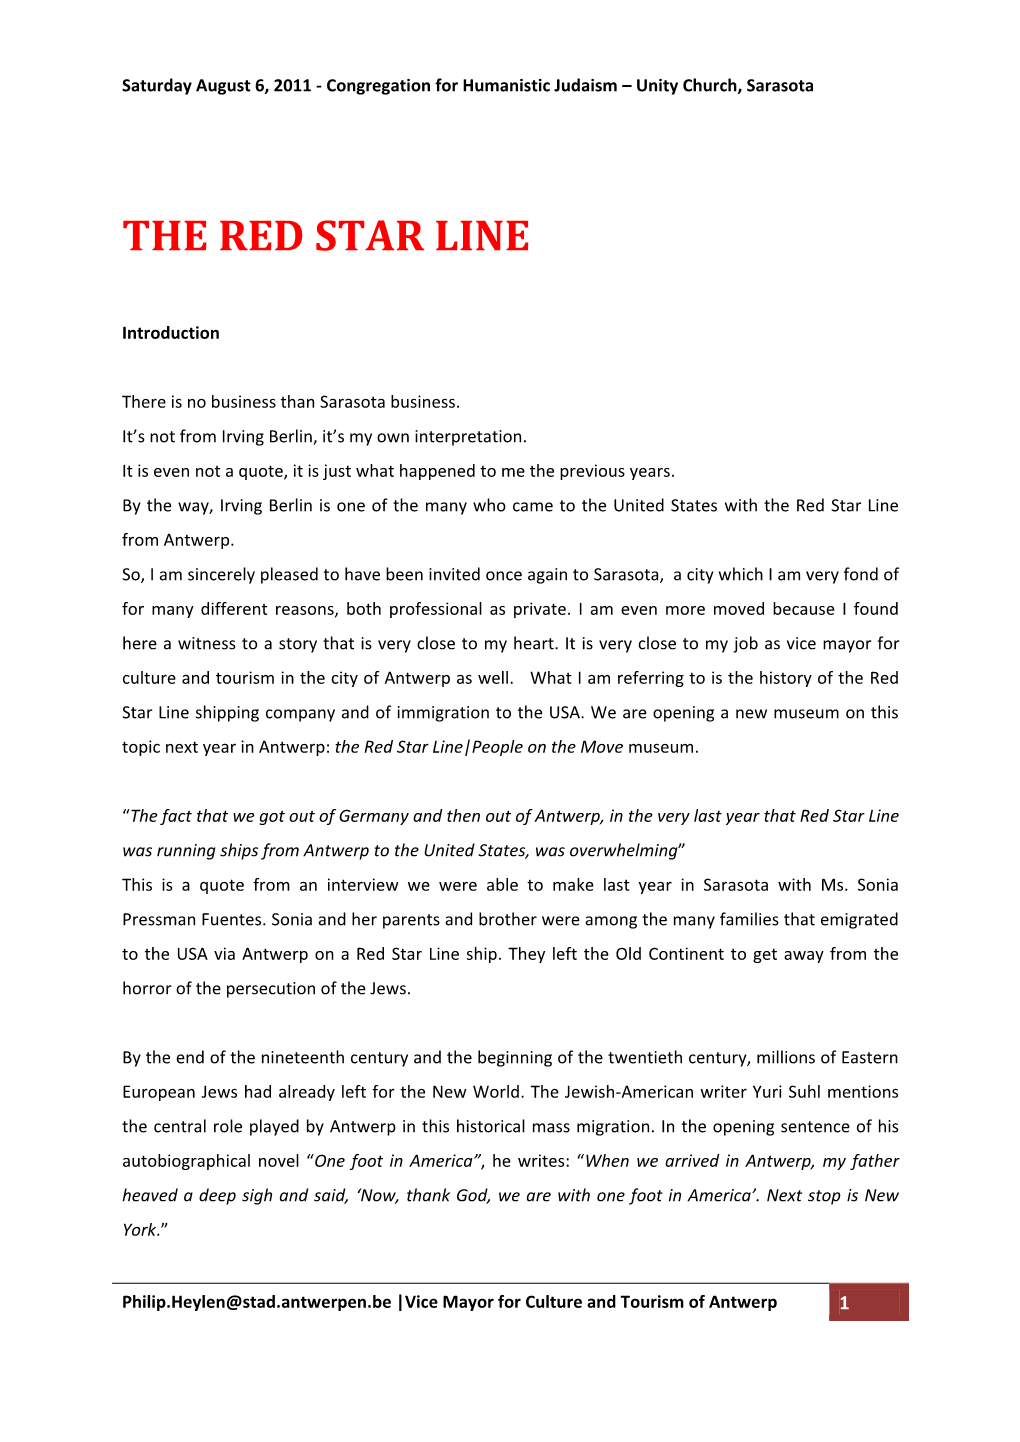 The Red Star Line and Jewish Immigrants